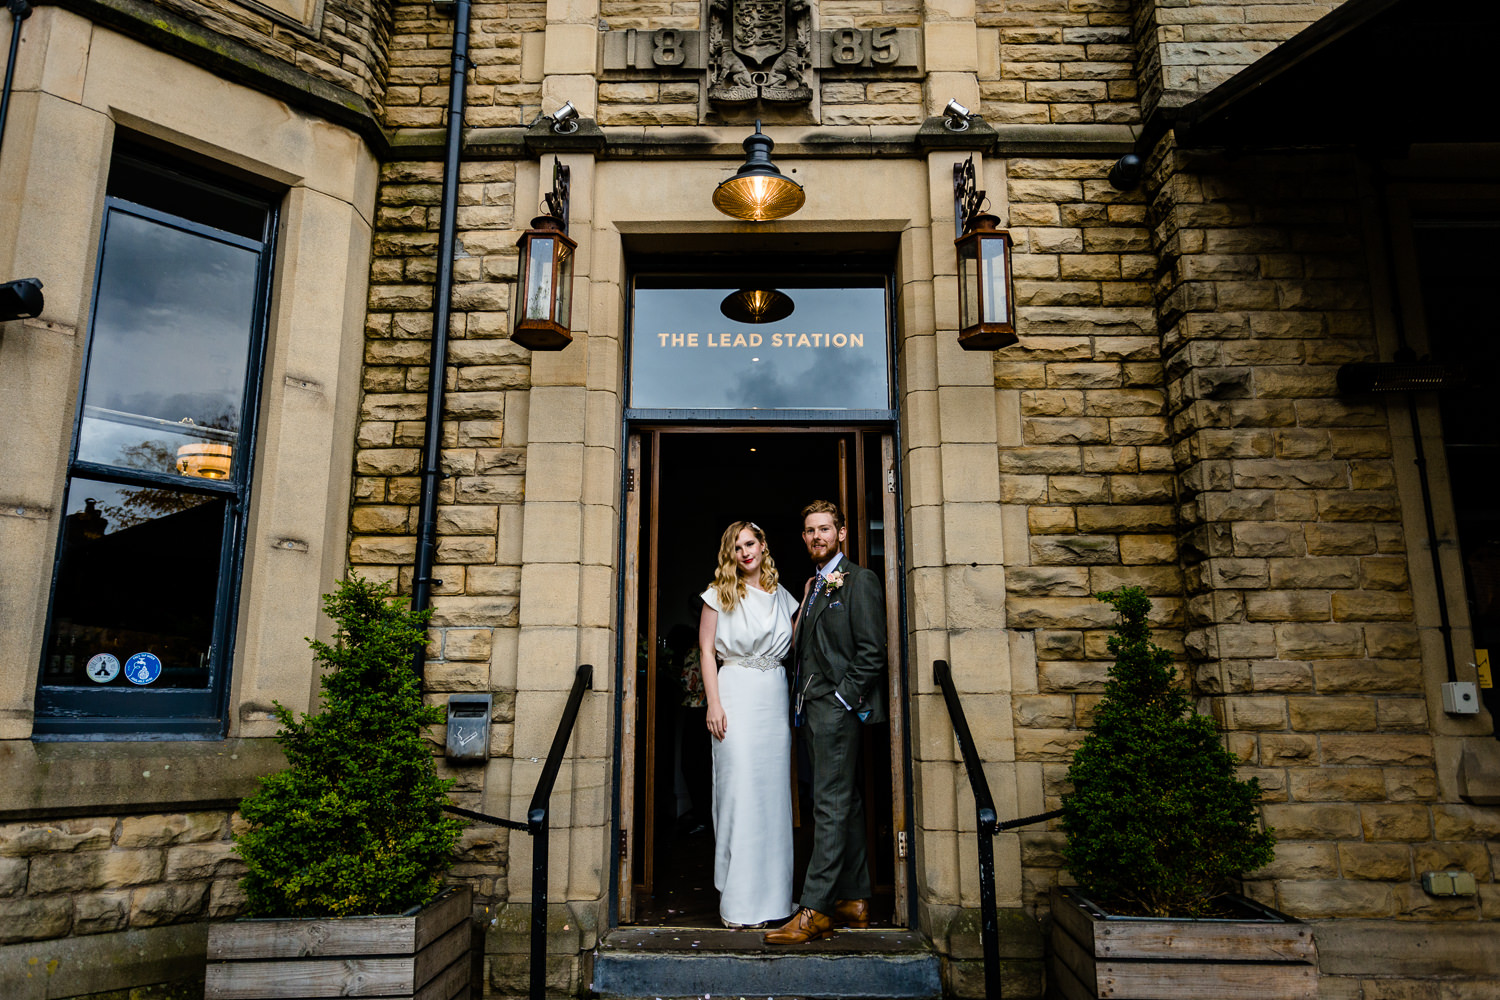 The Lead Station, a wedding venue in Chorlton Manchester, Rose &amp; Josh standing in the doorway.